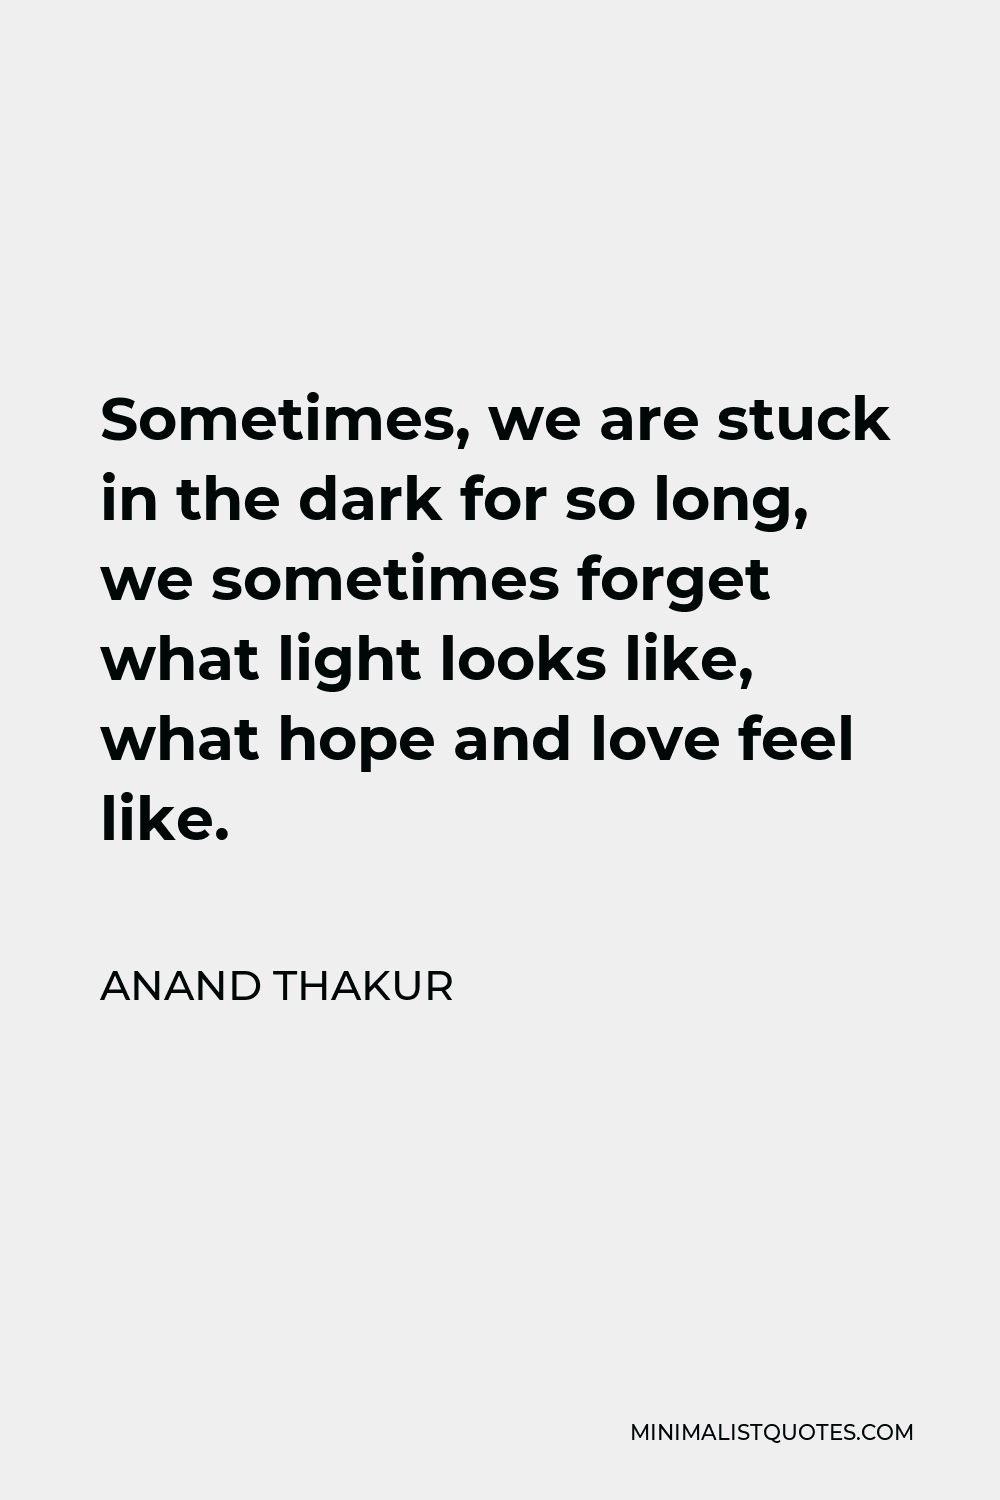 Anand Thakur Quote: Sometimes, We Are Stuck In The Dark For So Long, We  Sometimes Forget What Light Looks Like, What Hope And Love Feel Like.